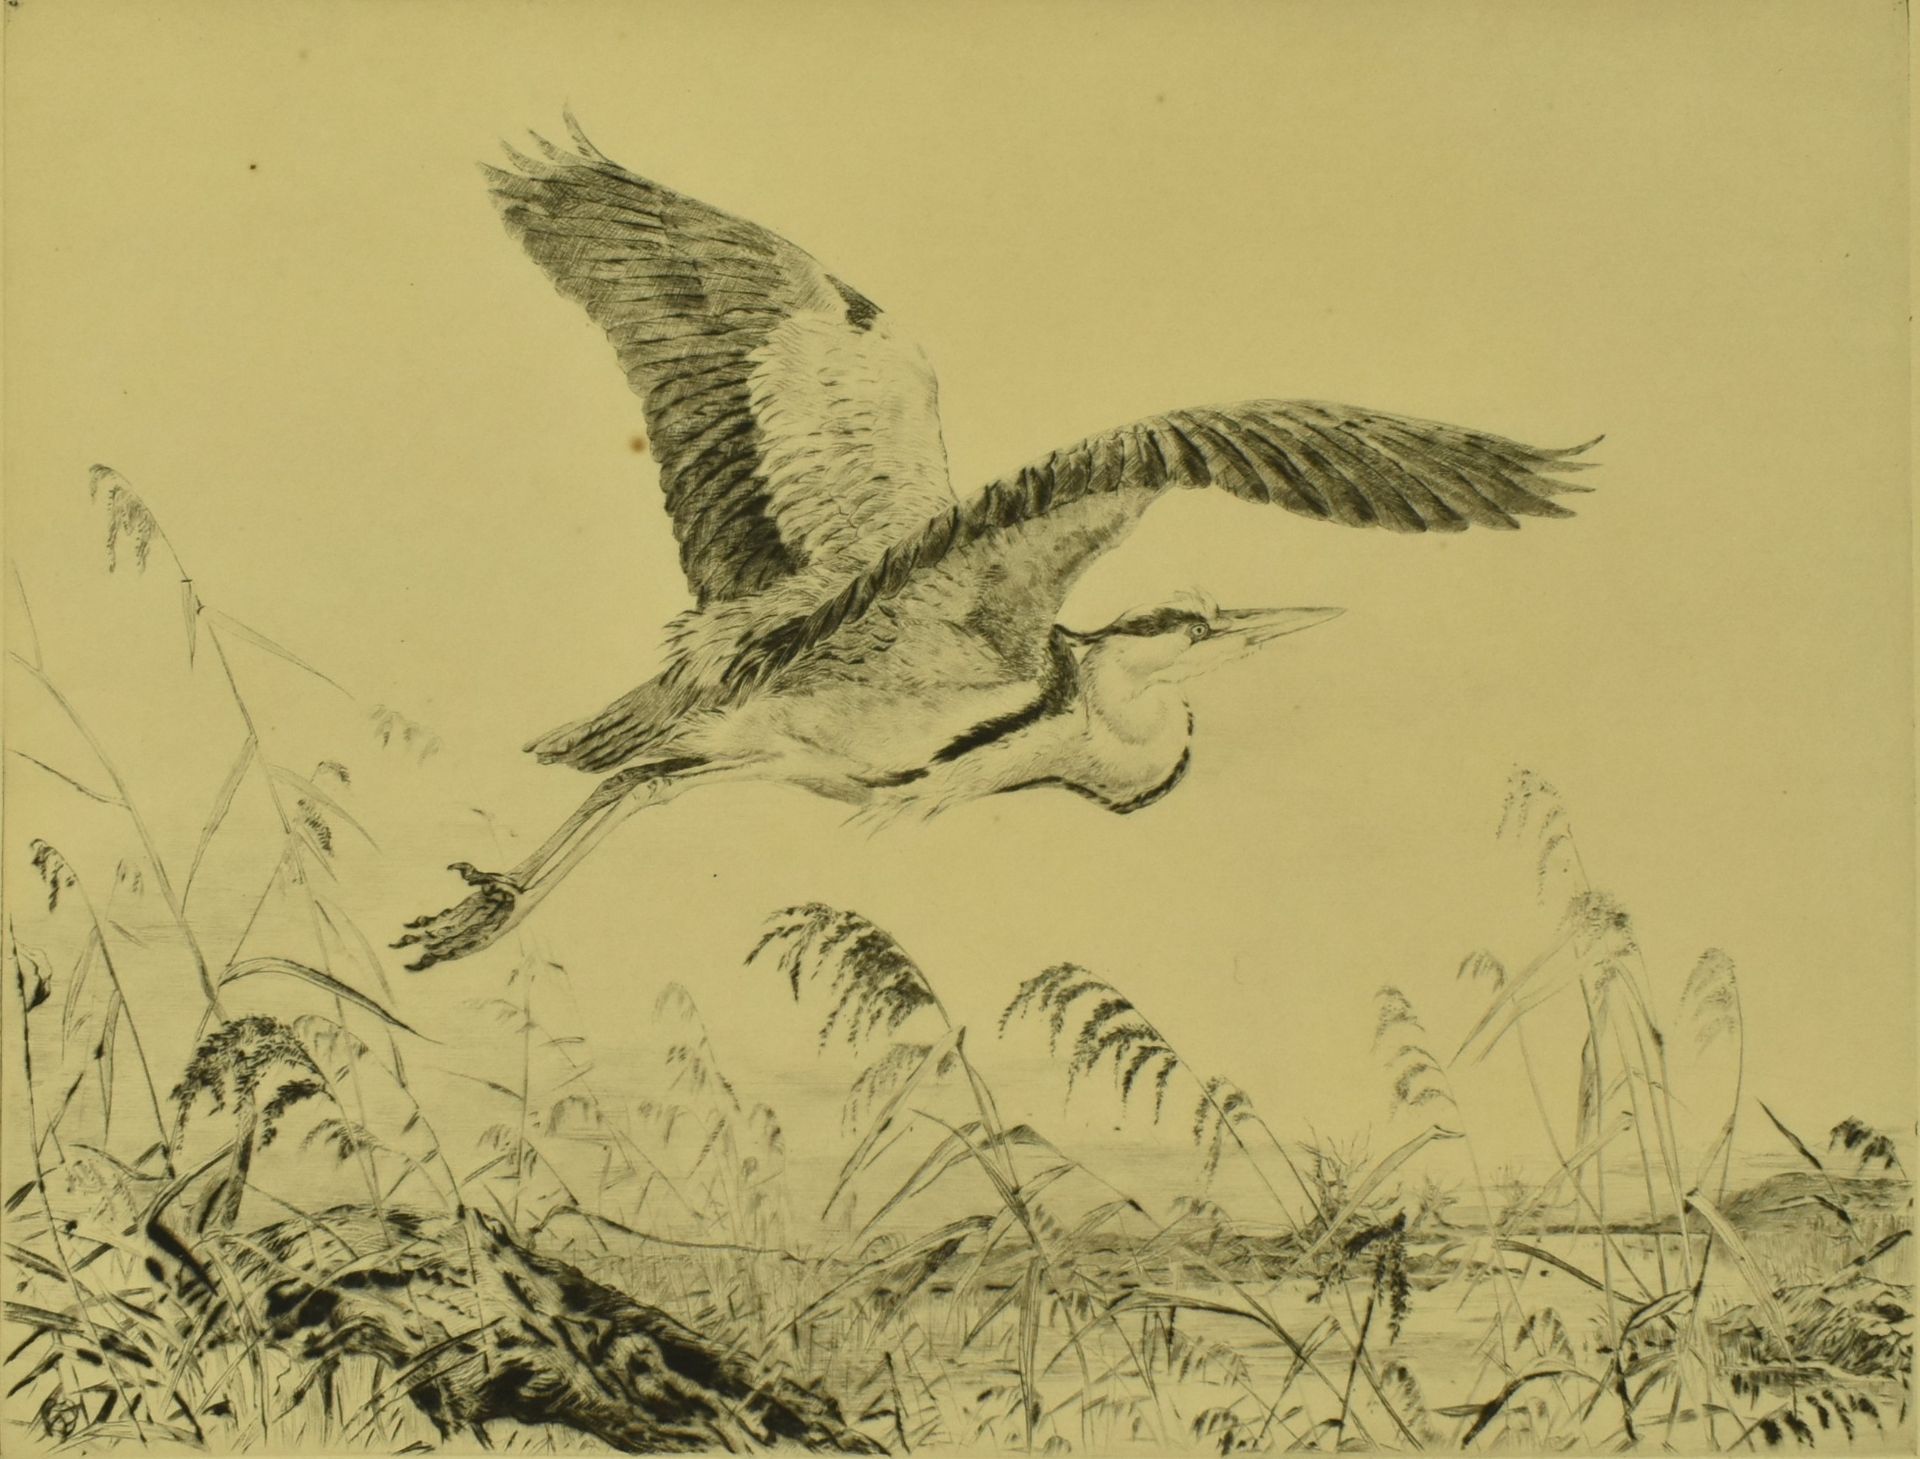 WINIFRED AUSTEN - MAKING OFF - DRYPOINT ETCHING OF STORK